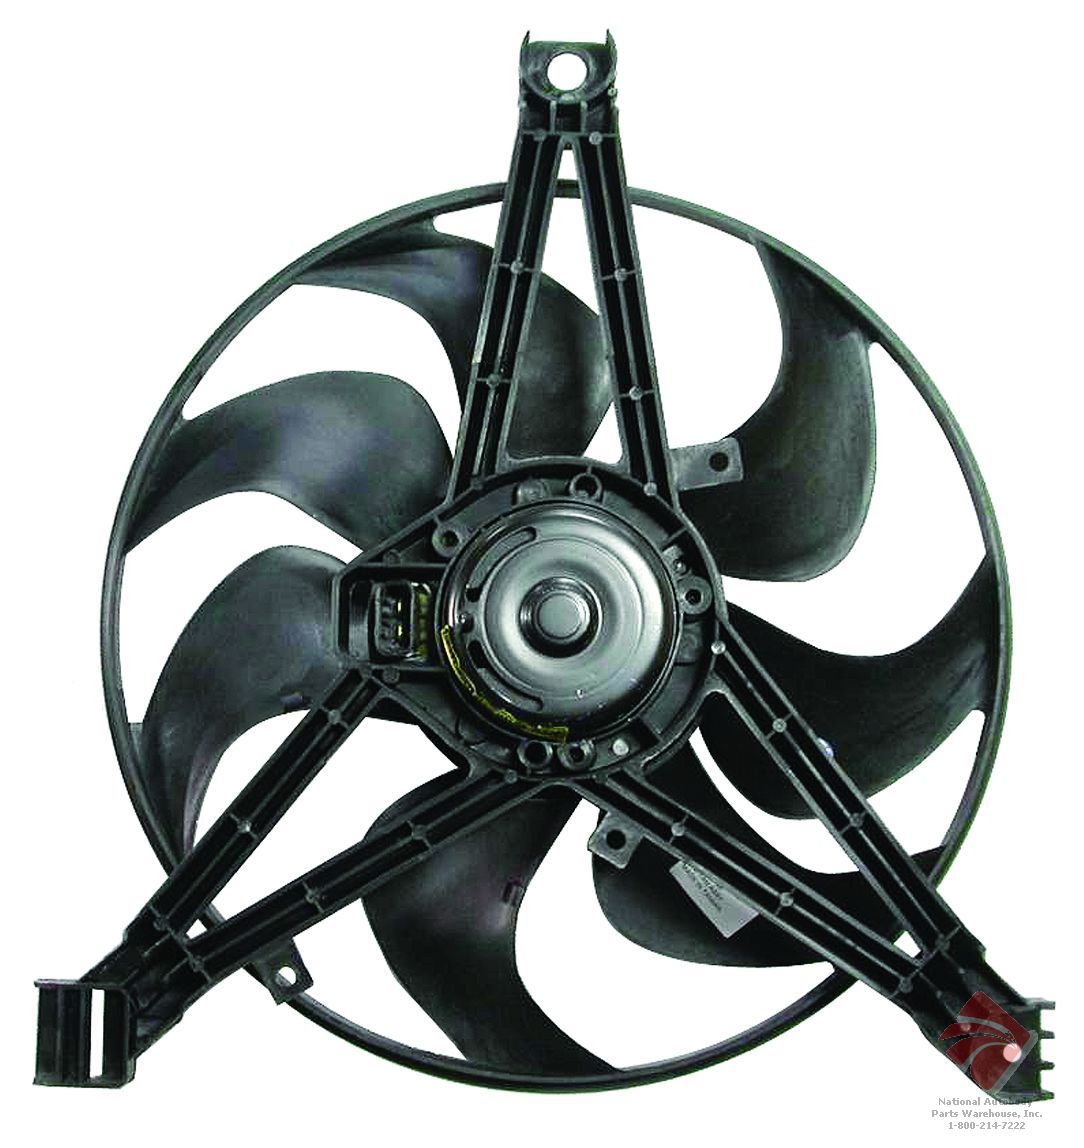 Aftermarket FAN ASSEMBLY/FAN SHROUDS for OLDSMOBILE - INTRIGUE, INTRIGUE,98-98,Radiator cooling fan assy